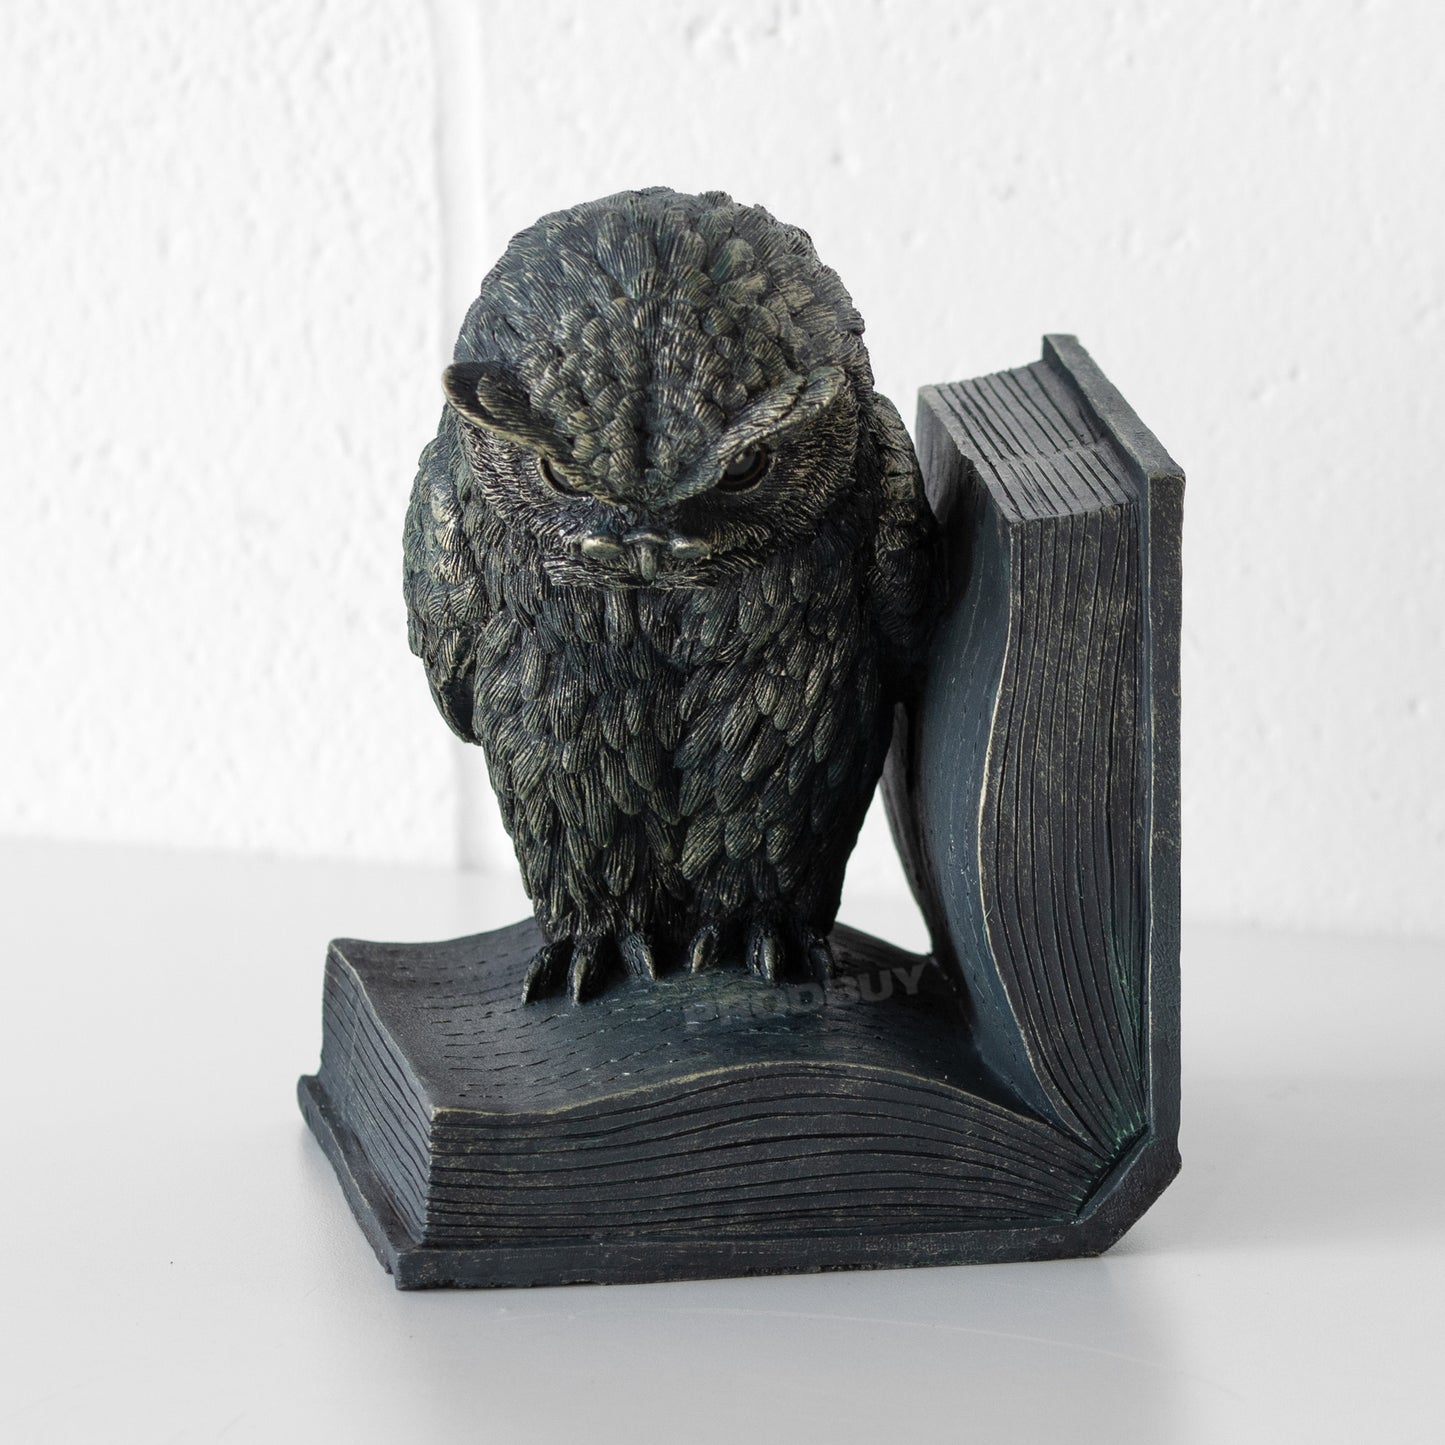 Studious Wise Owl Shelf Bookend Ornament